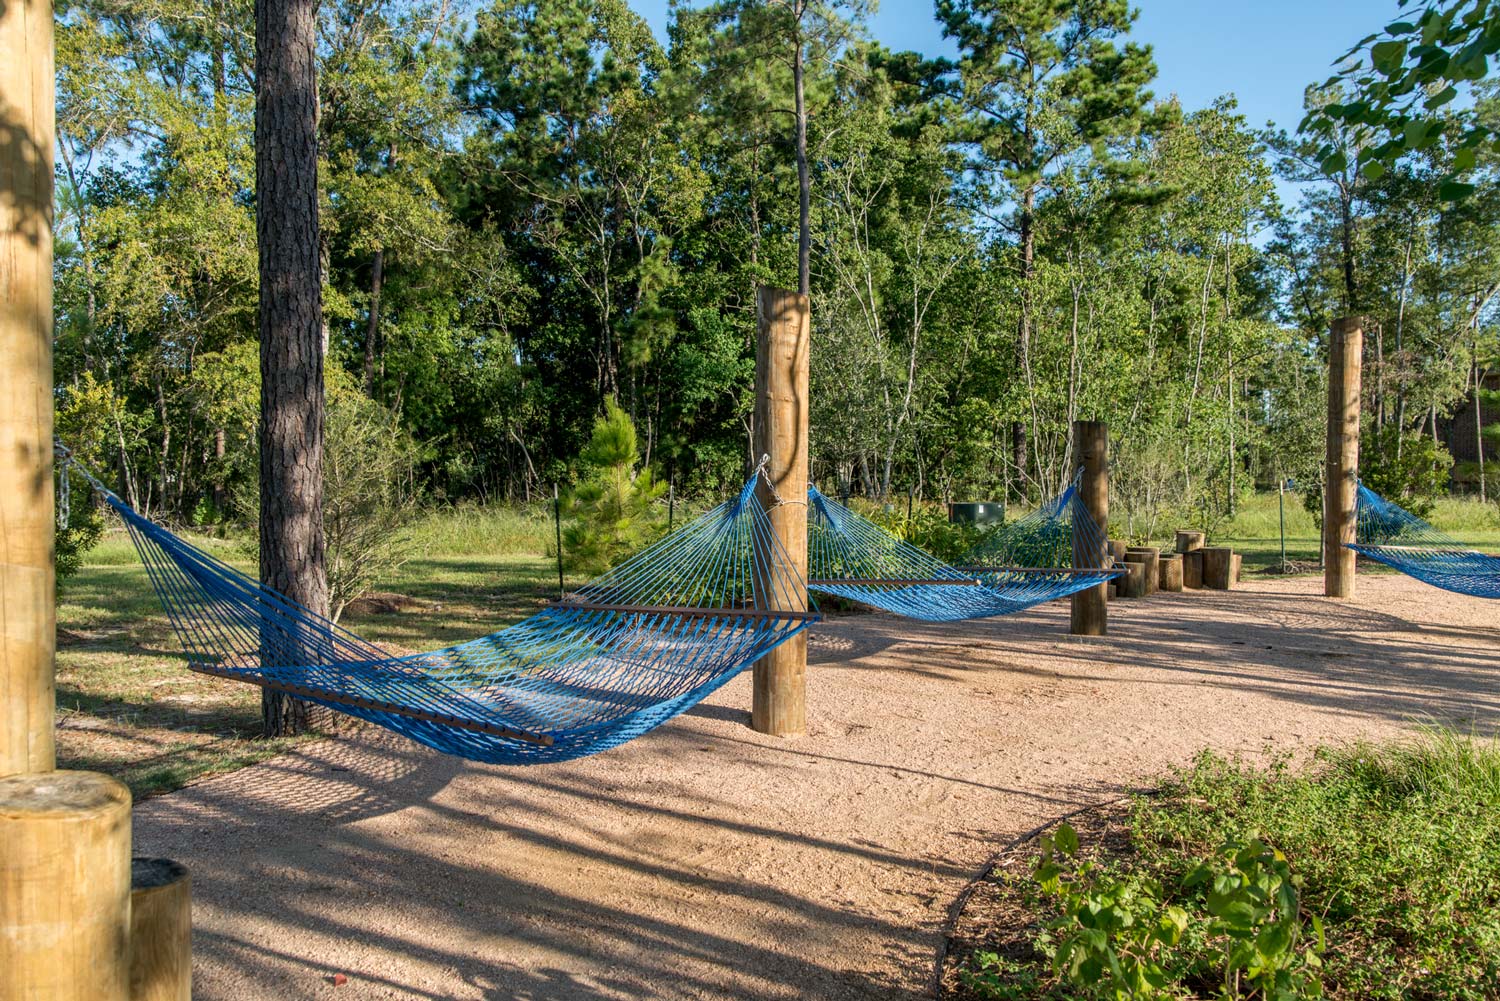 Residents can enjoy lounging on our hammocks along our Hammock Zone.